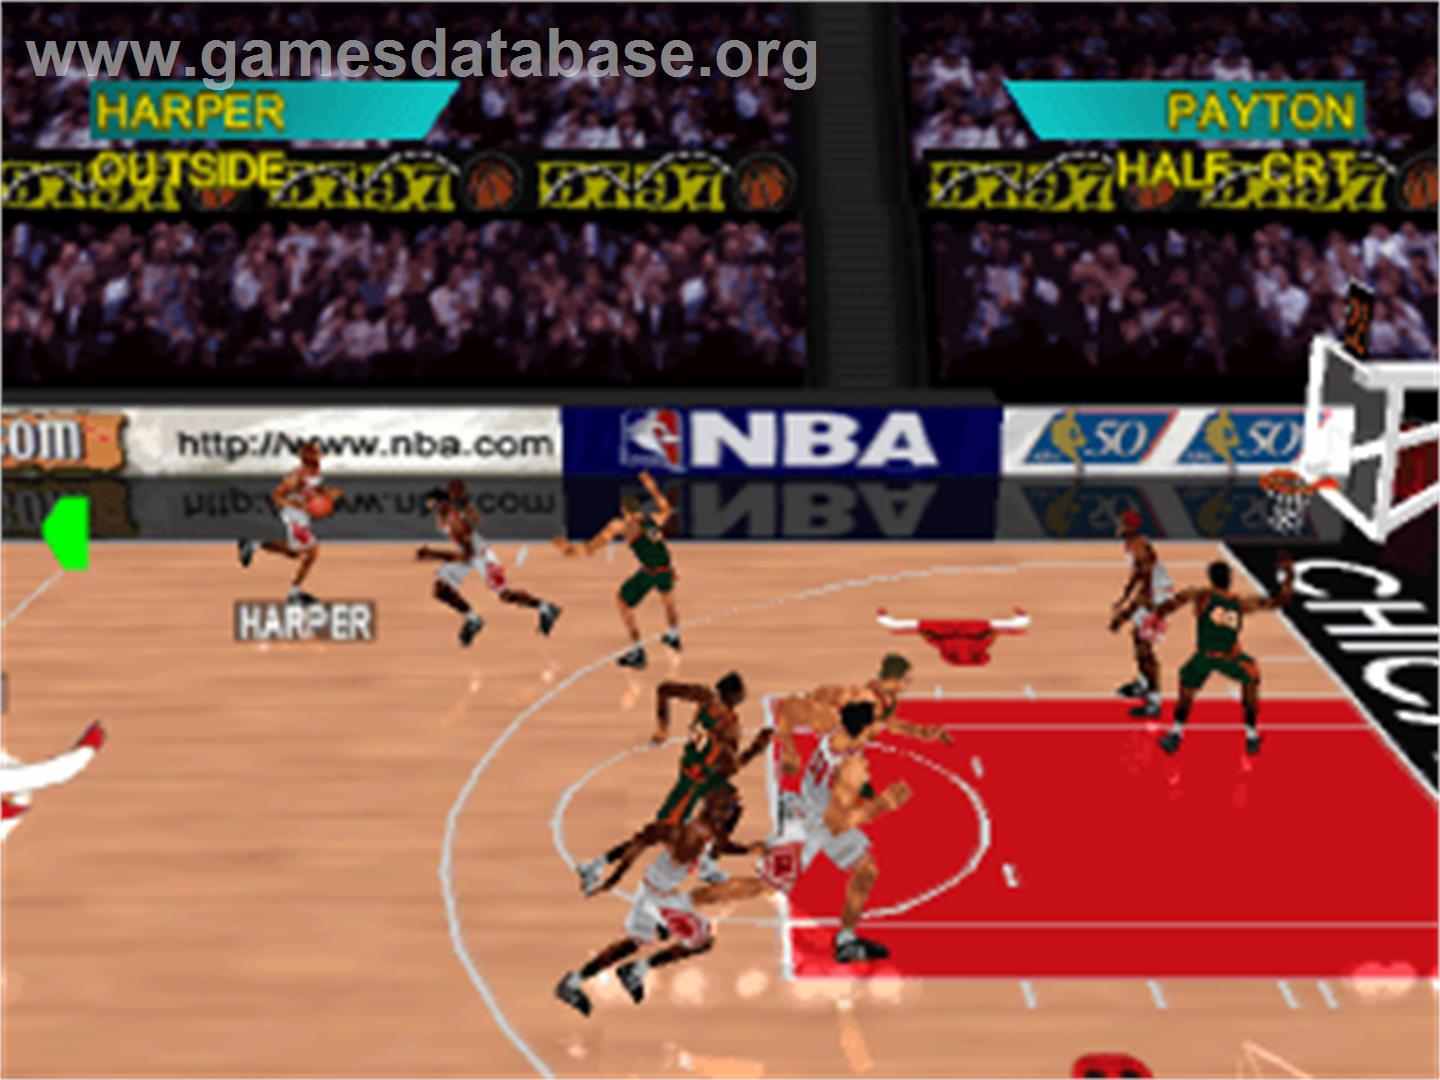 NBA Shootout '97 - Sony Playstation - Artwork - In Game